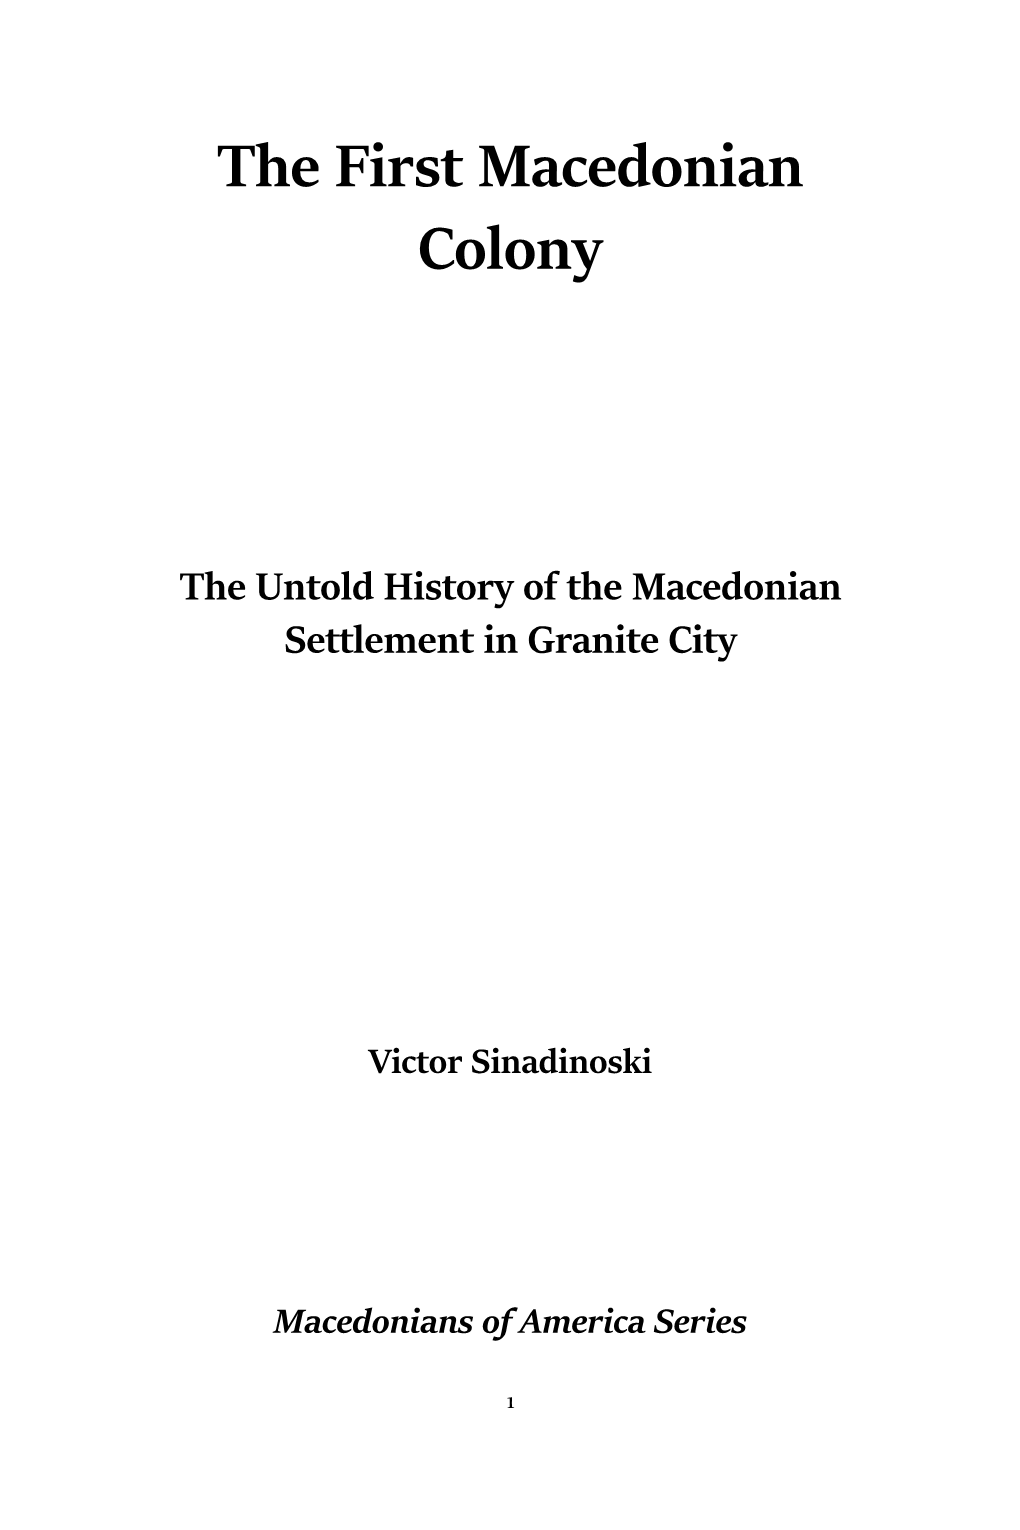 The First Macedonian Colony